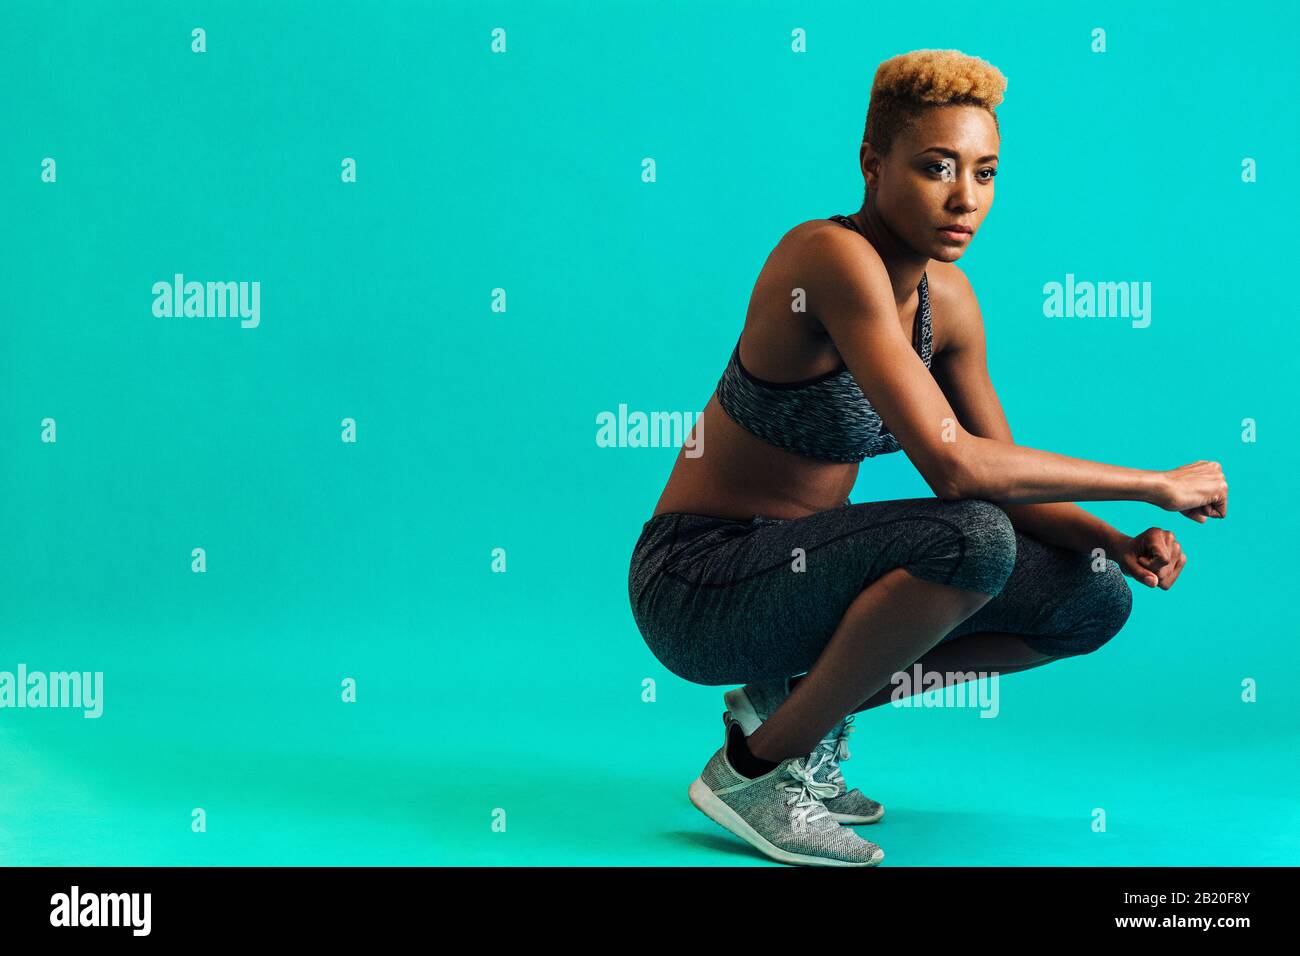 Portrait of a serious female athlete in sports bra and gym tights, squatting and looking off, against studio background Stock Photo